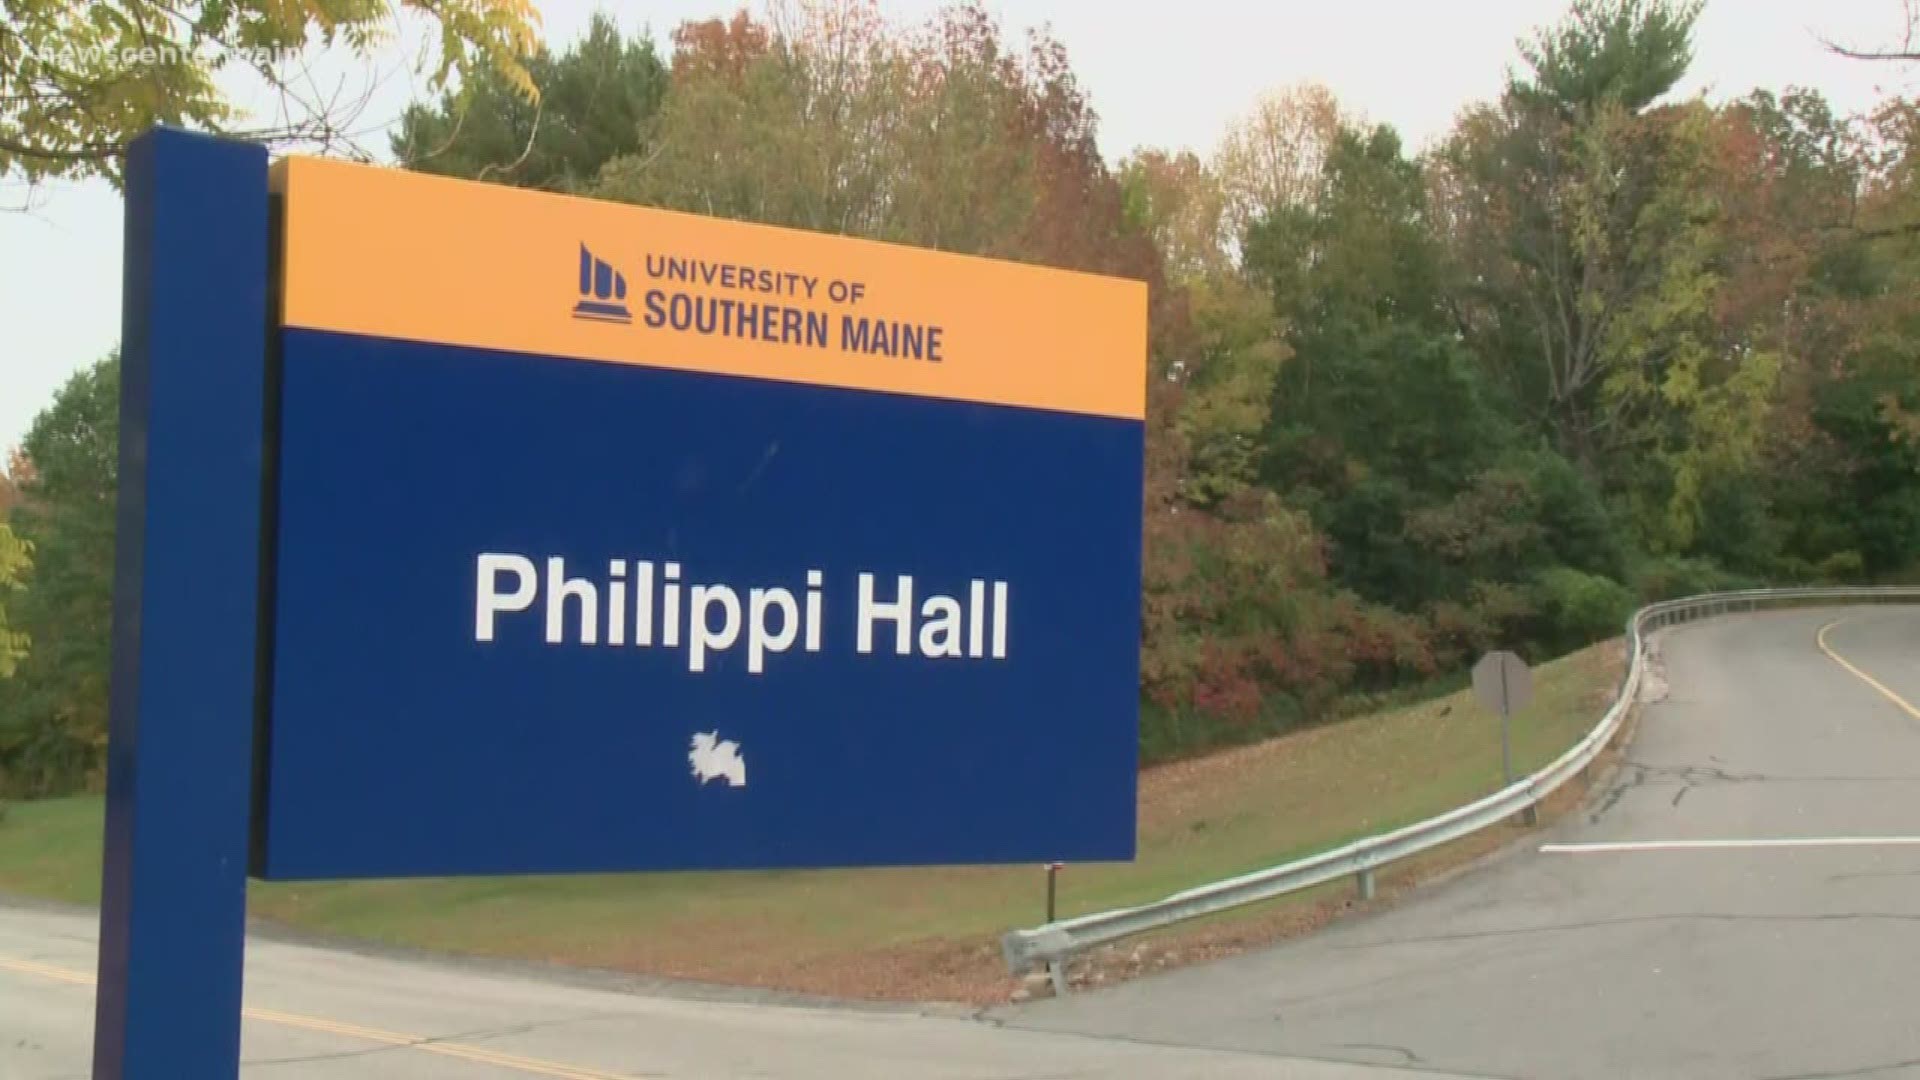 USM police are still looking for a man who has exposed himself to students in two separate incidents.